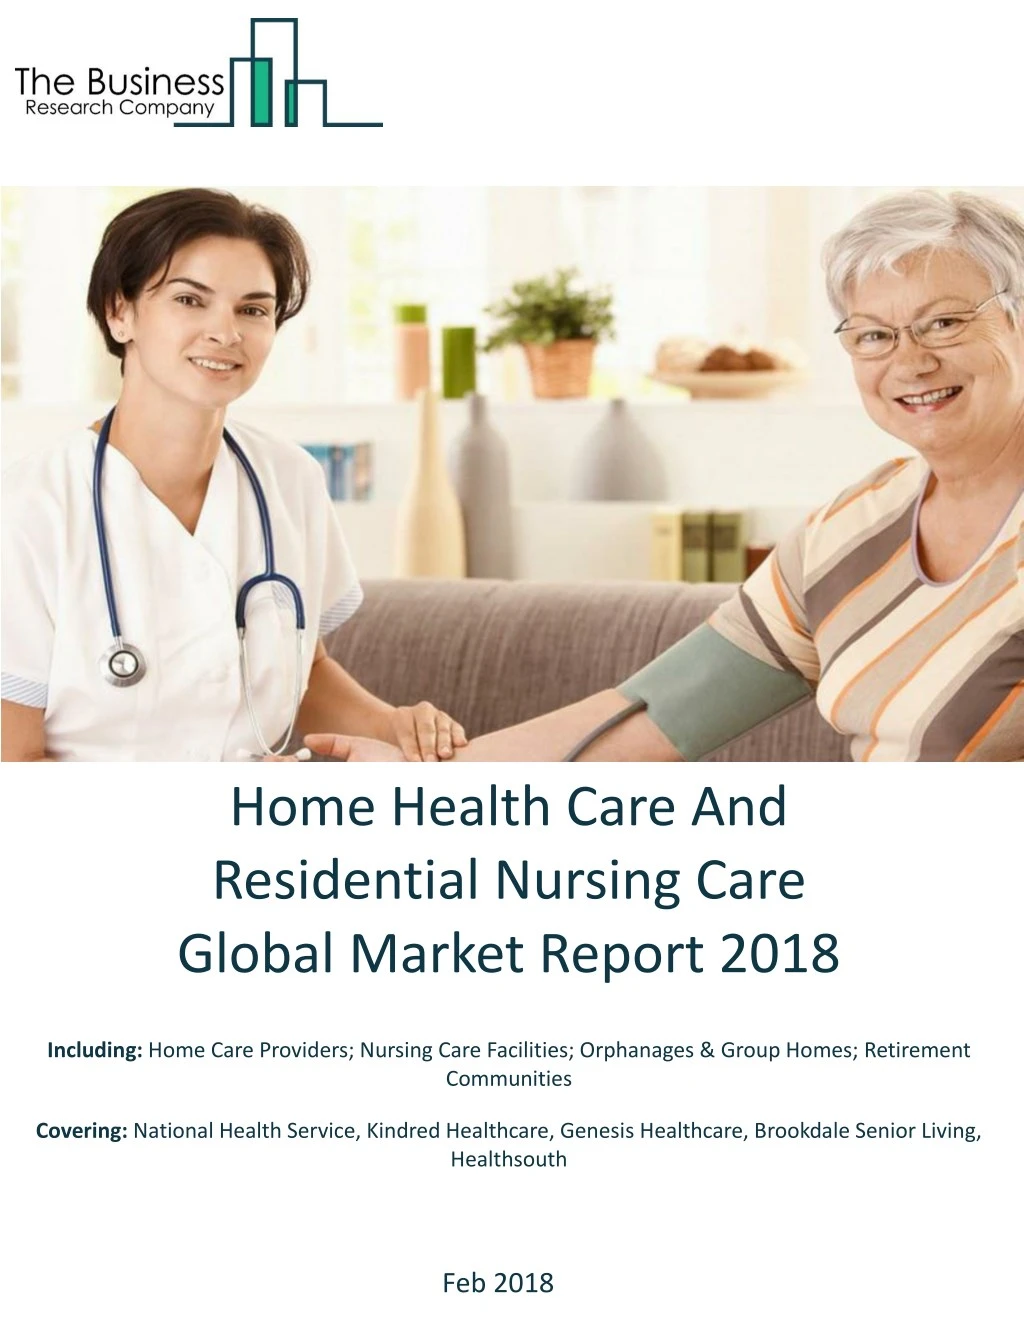 home health care and residential nursing care